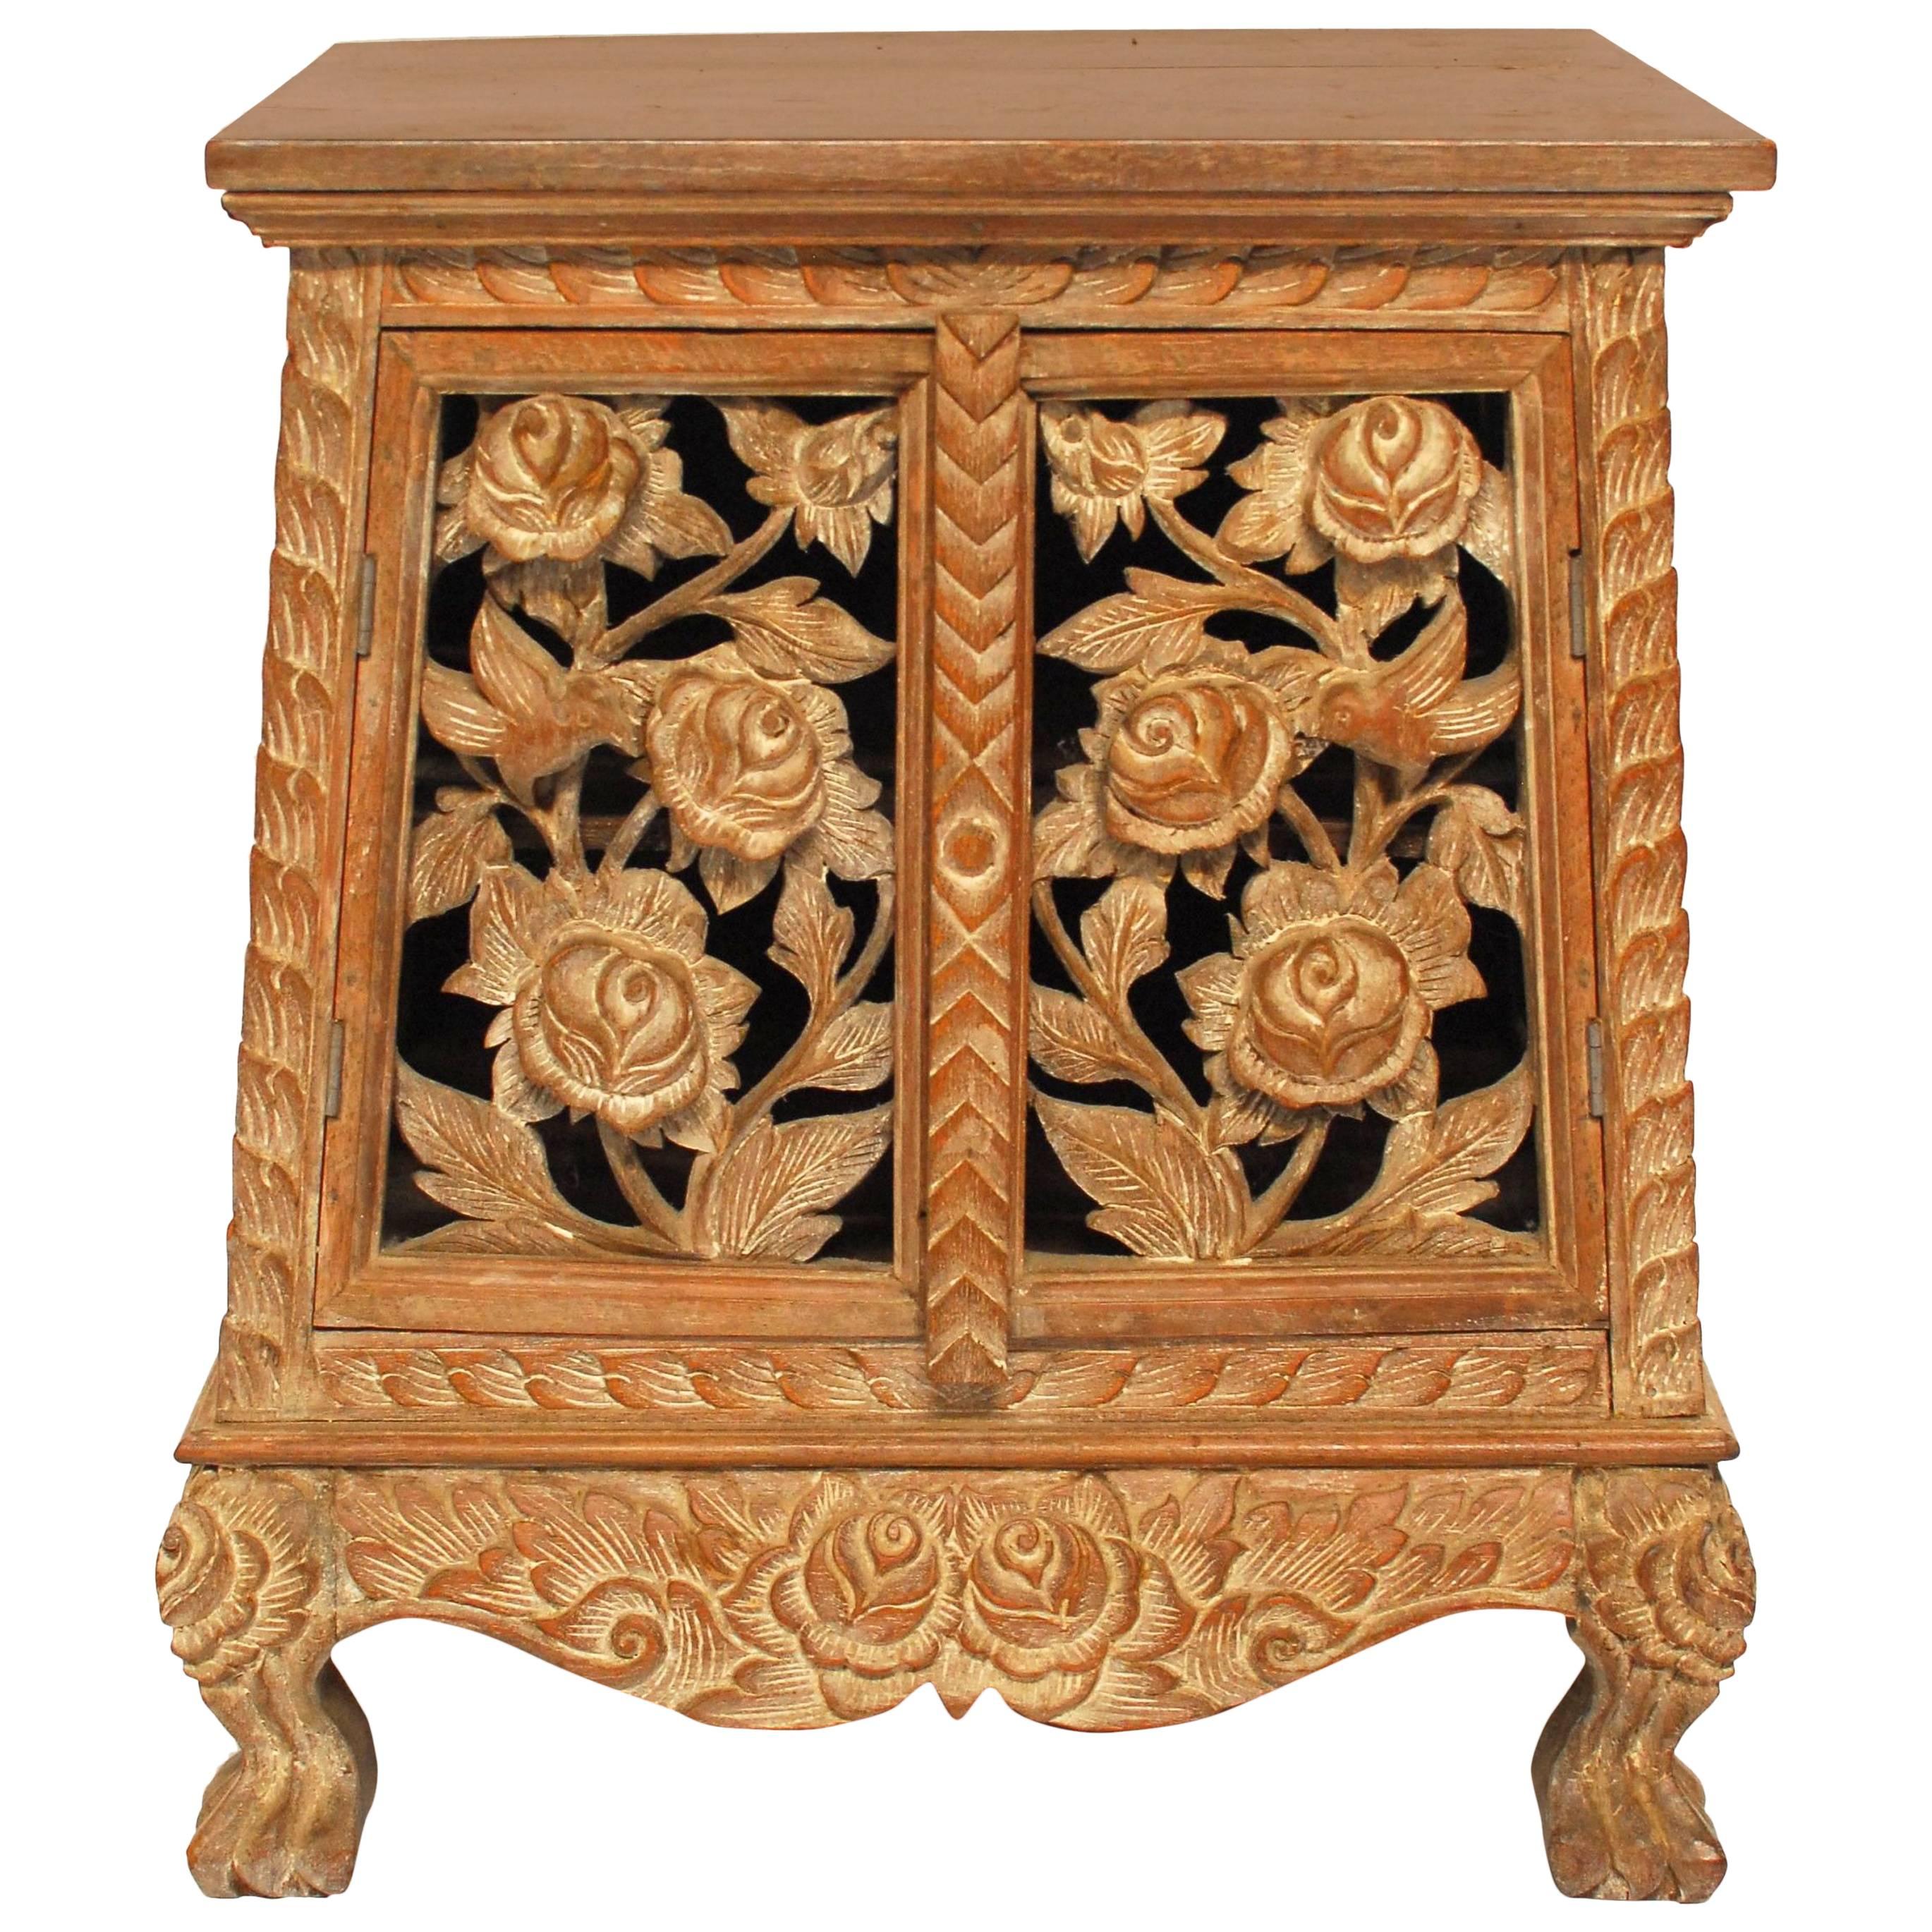 Asian Hand-Carved Temple Chest Cabinet